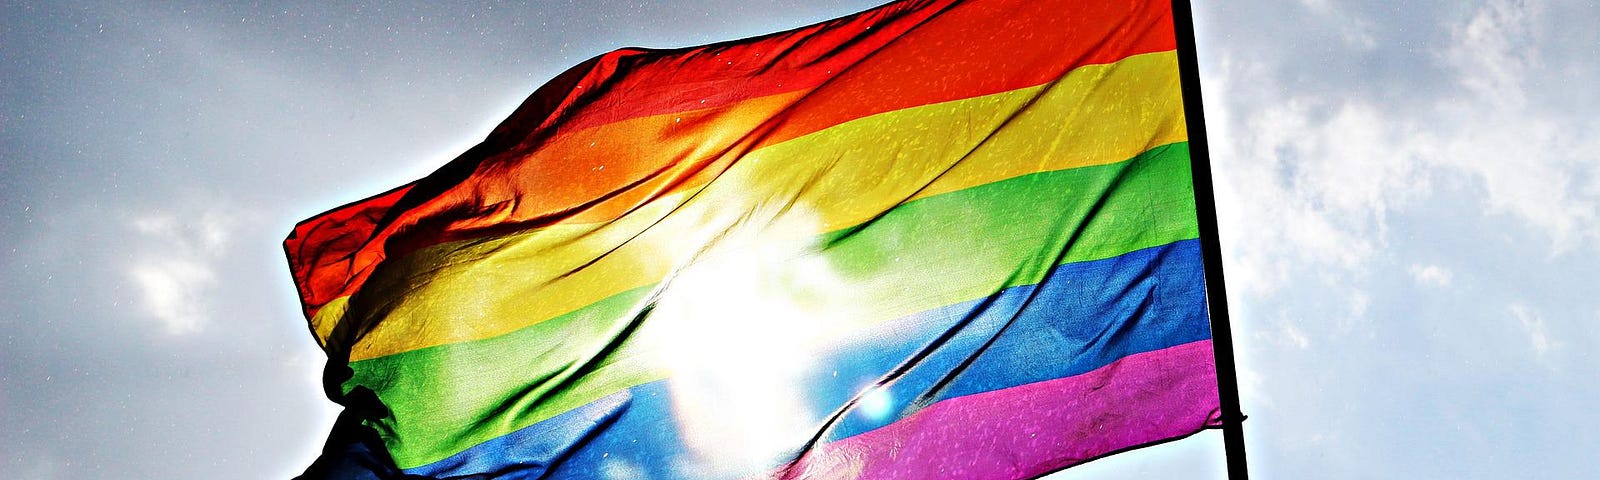 A rainbow pride flag flies against a blue sky with scattered white clouds. The sun is behind the flag, showing through the fabric.